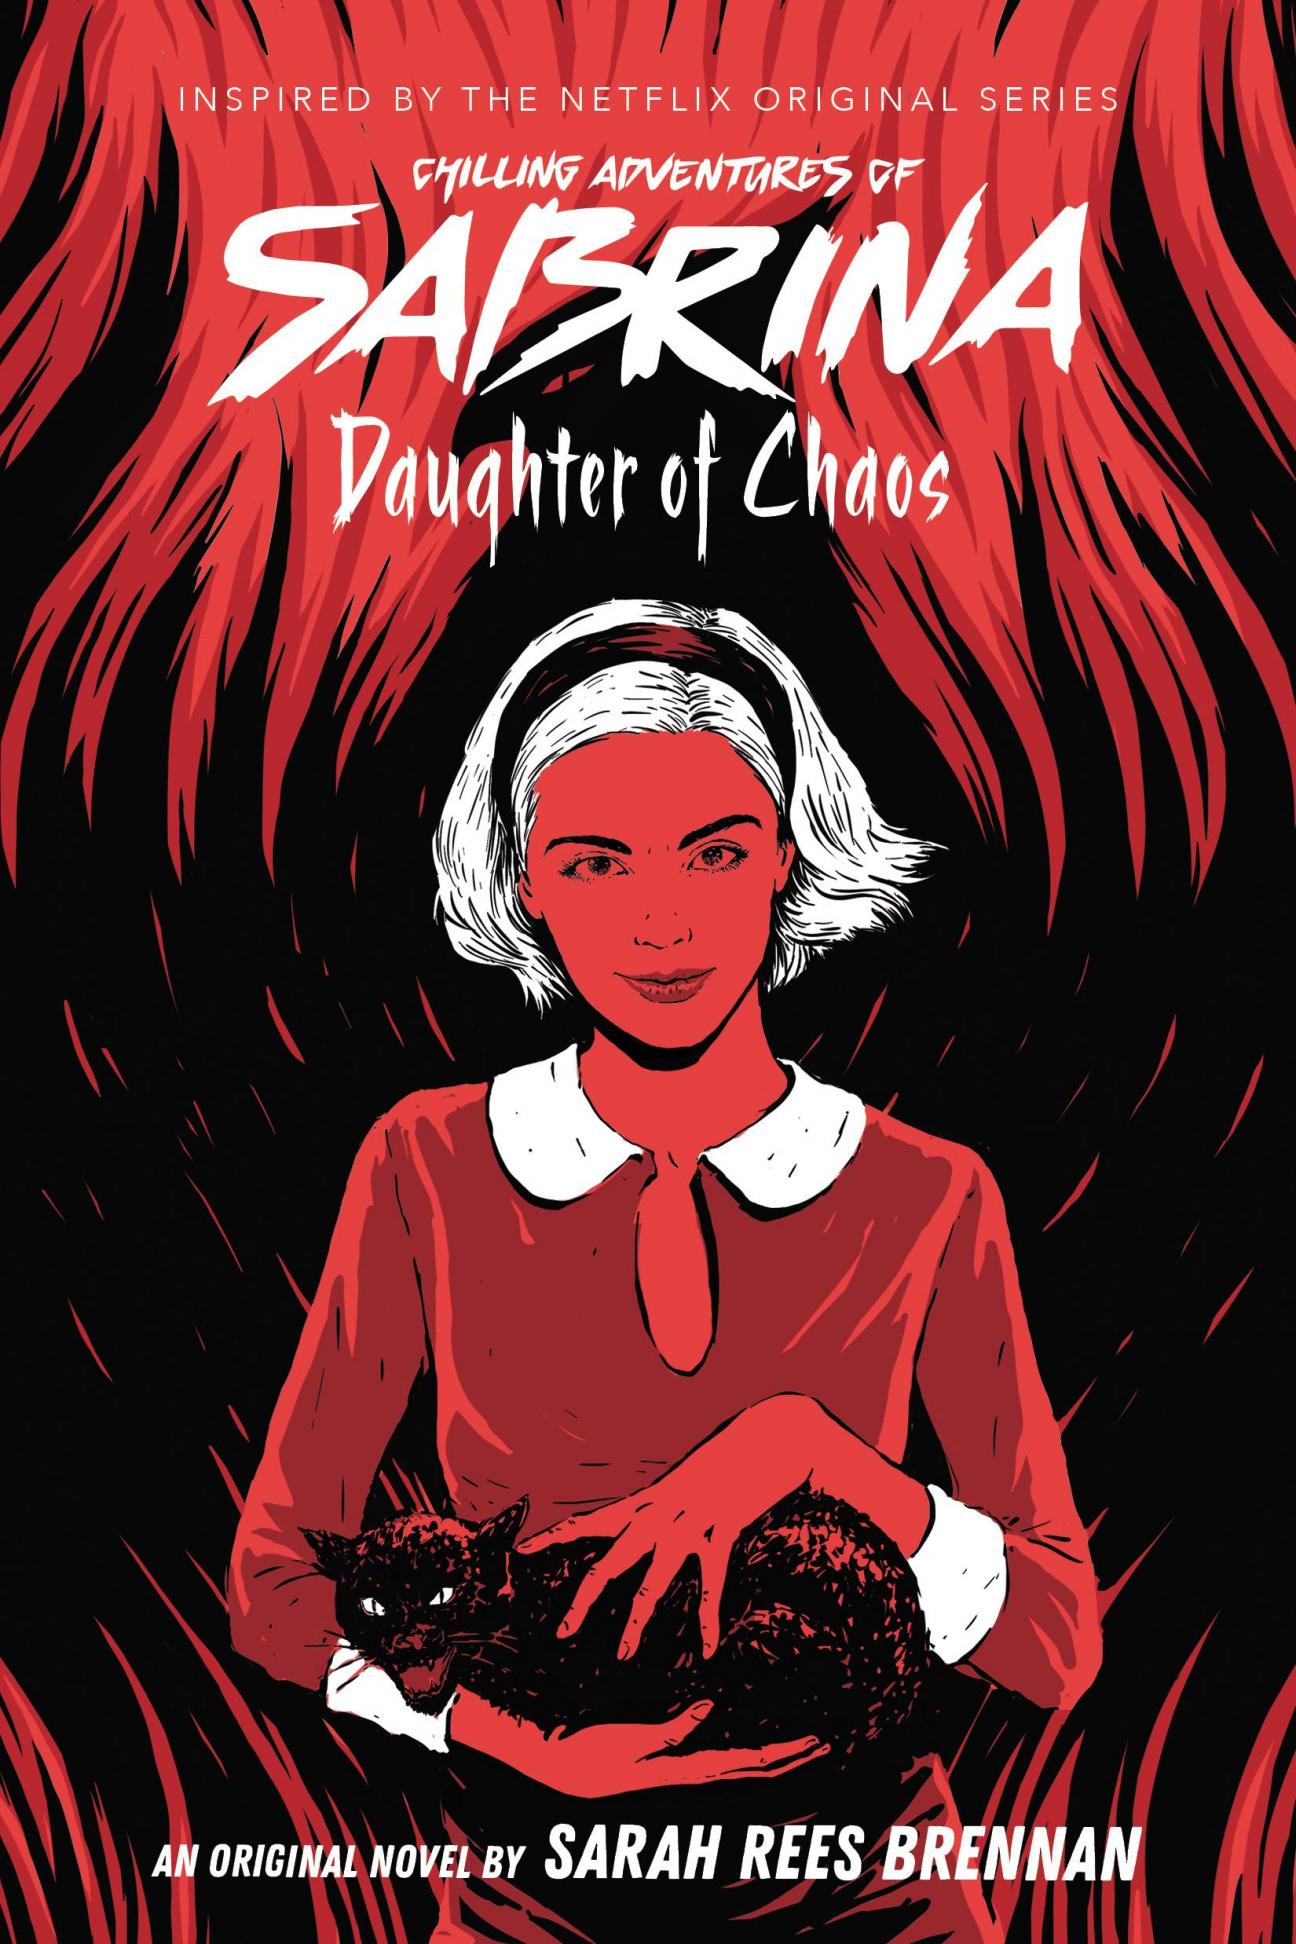 Cover of Daughter of Chaos from the Chilling Adventures of Sabrina